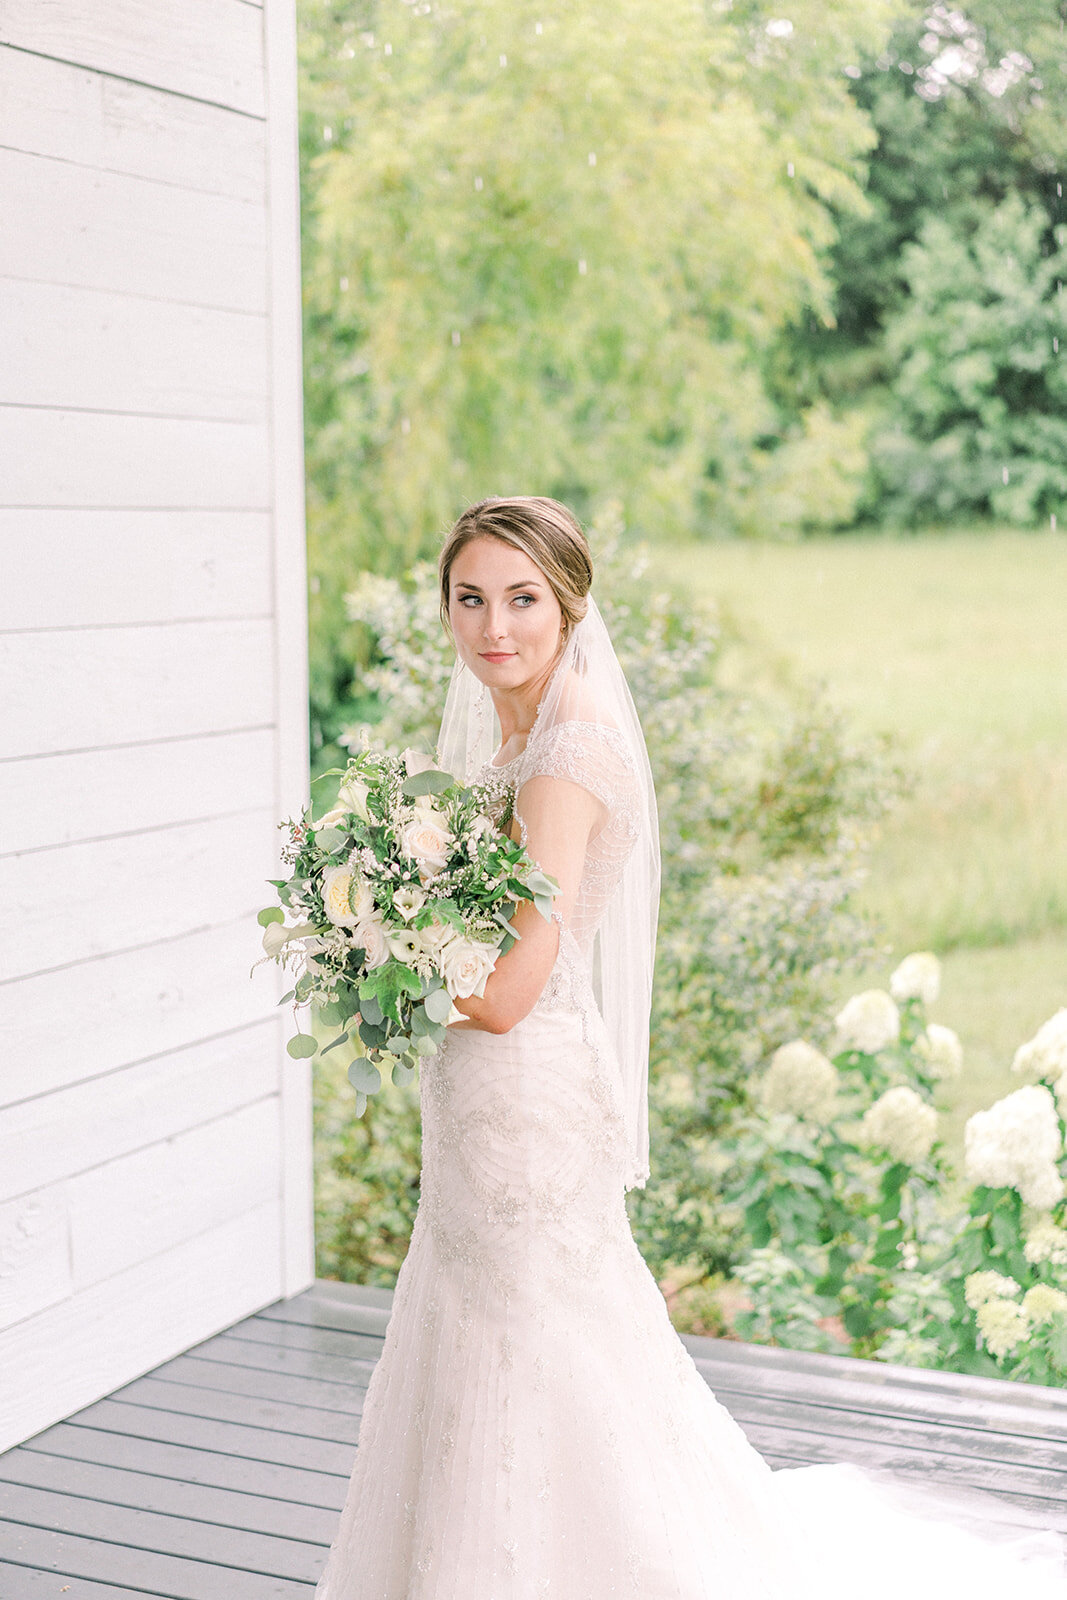 bride holding a bouquet of white flowers while looking off into the distance